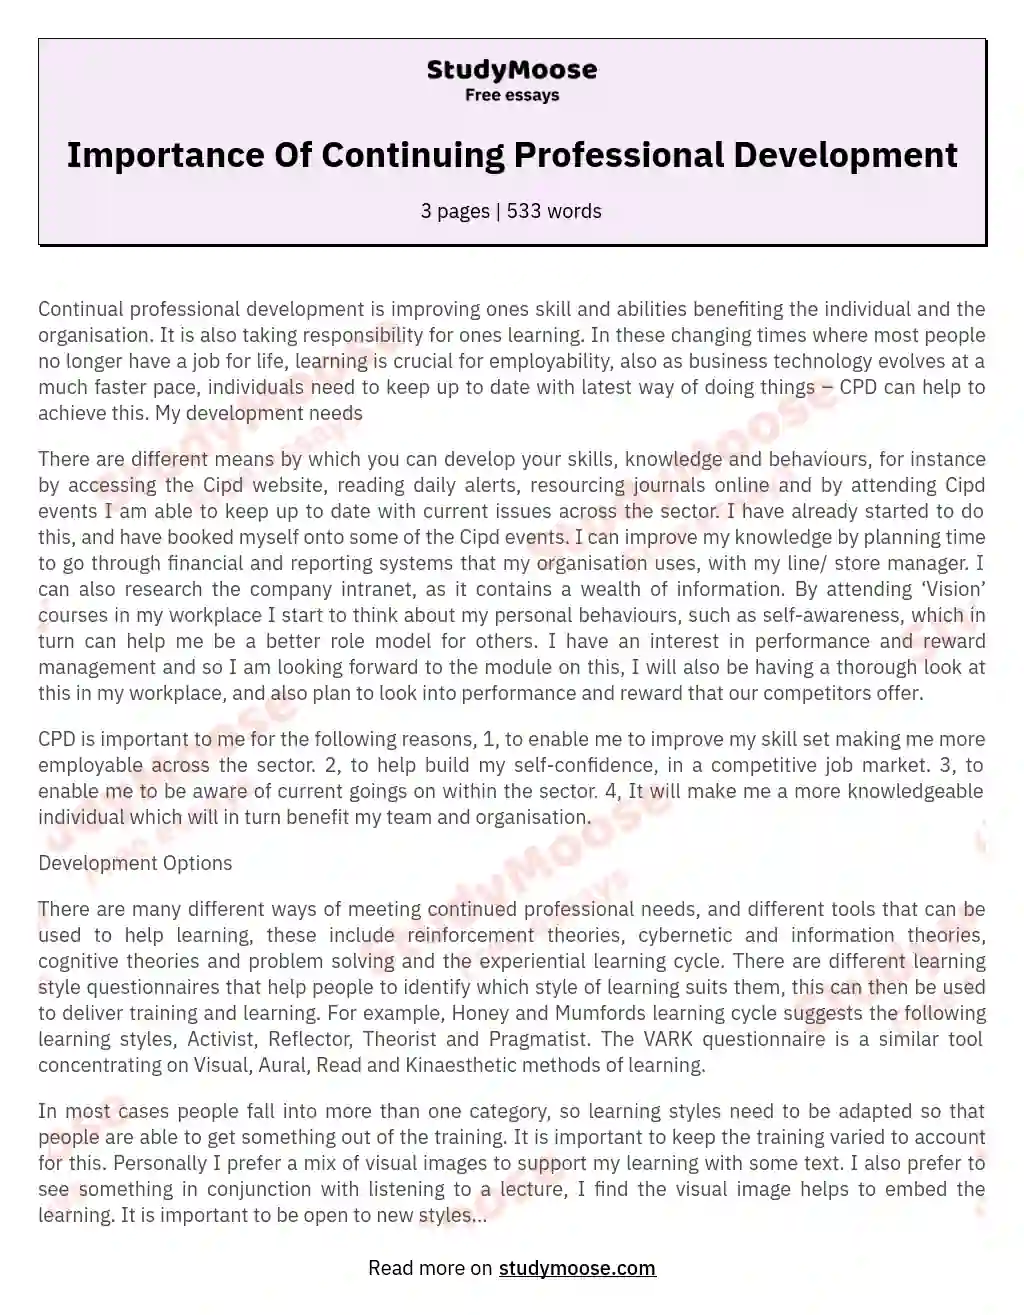 Importance Of Continuing Professional Development